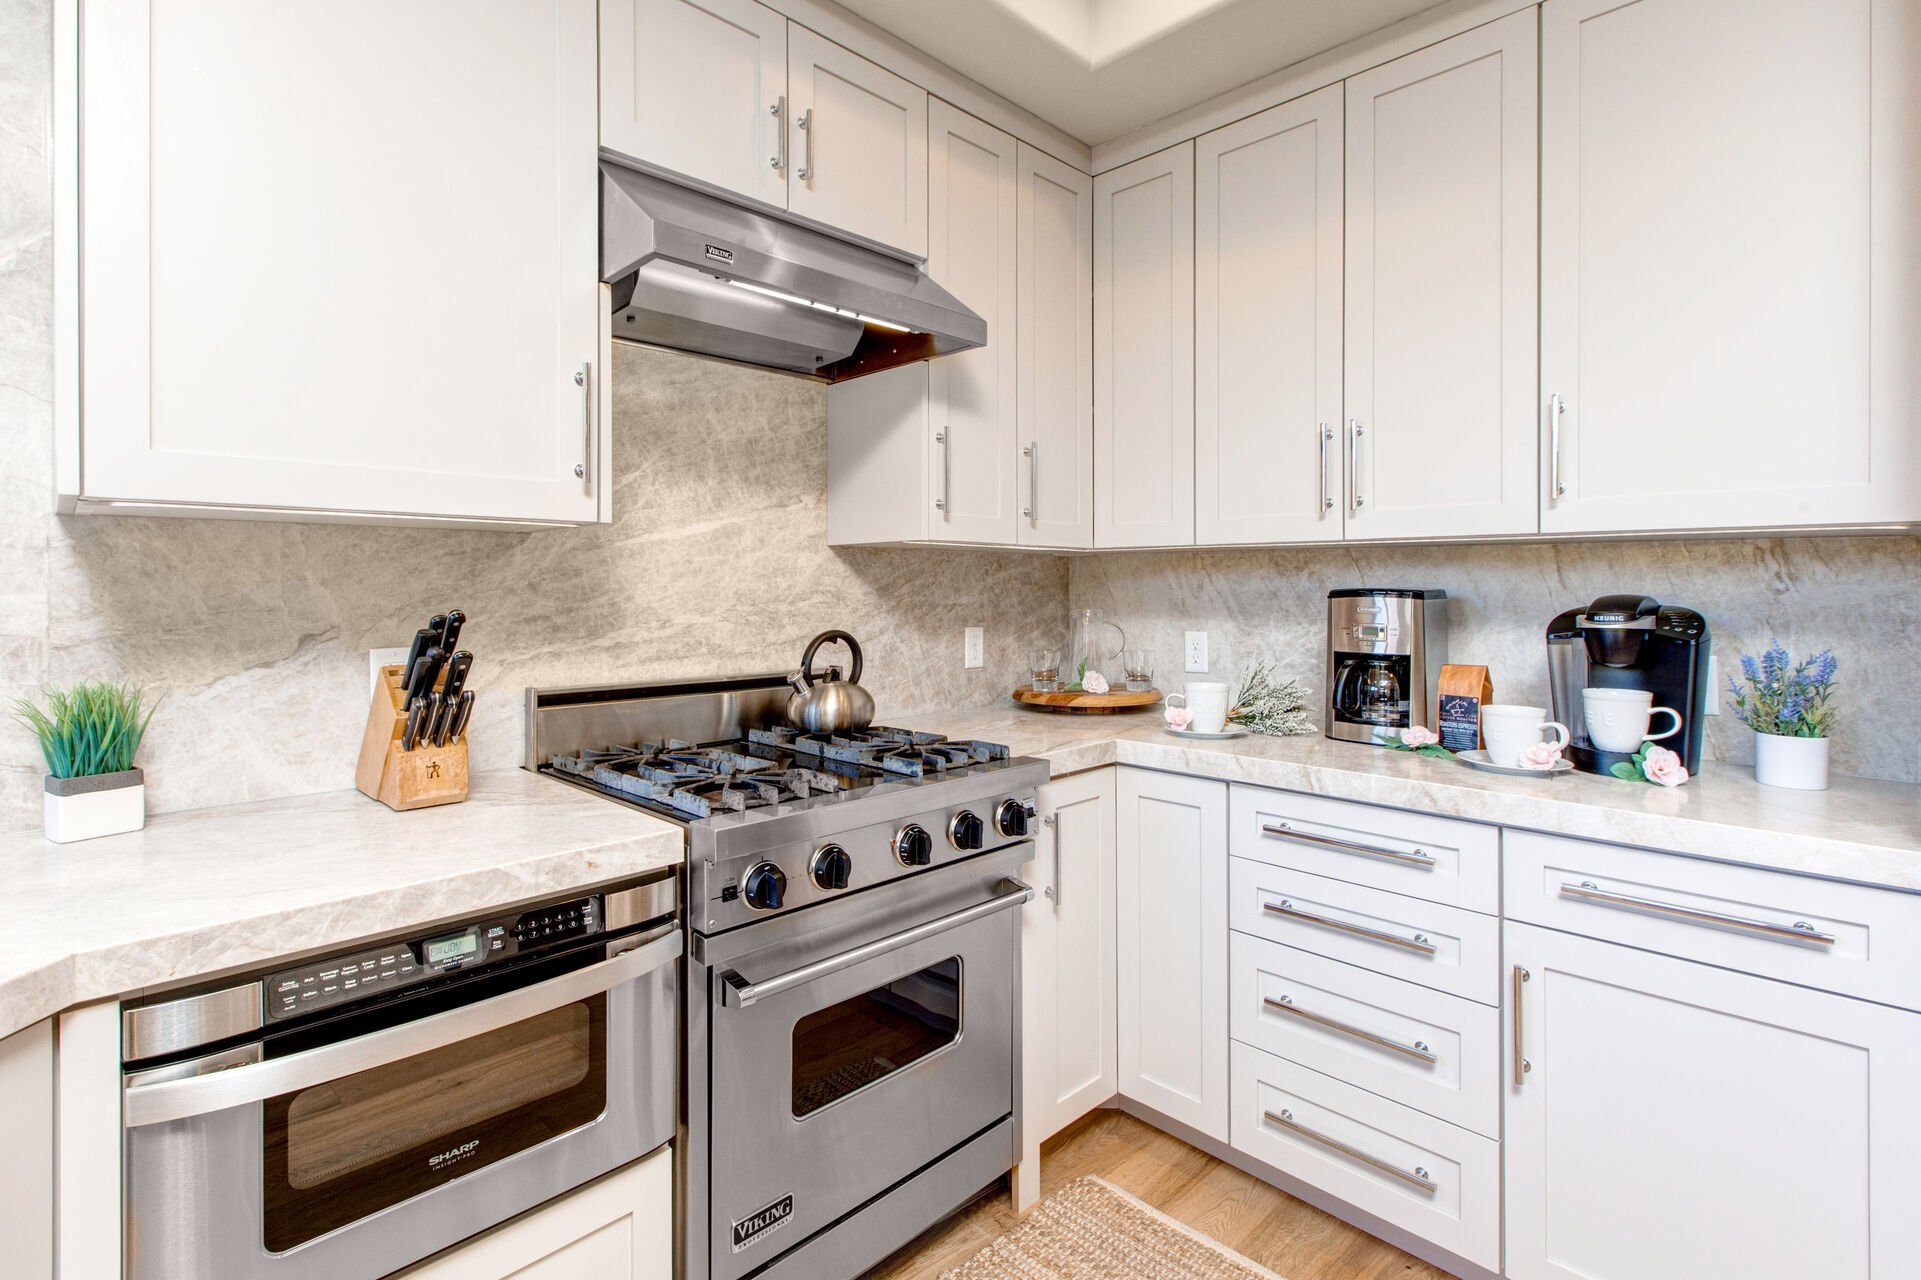 Fully Equipped Kitchen with stunning stone countertops, stainless steel Viking appliances, ice maker, and bar seating for four